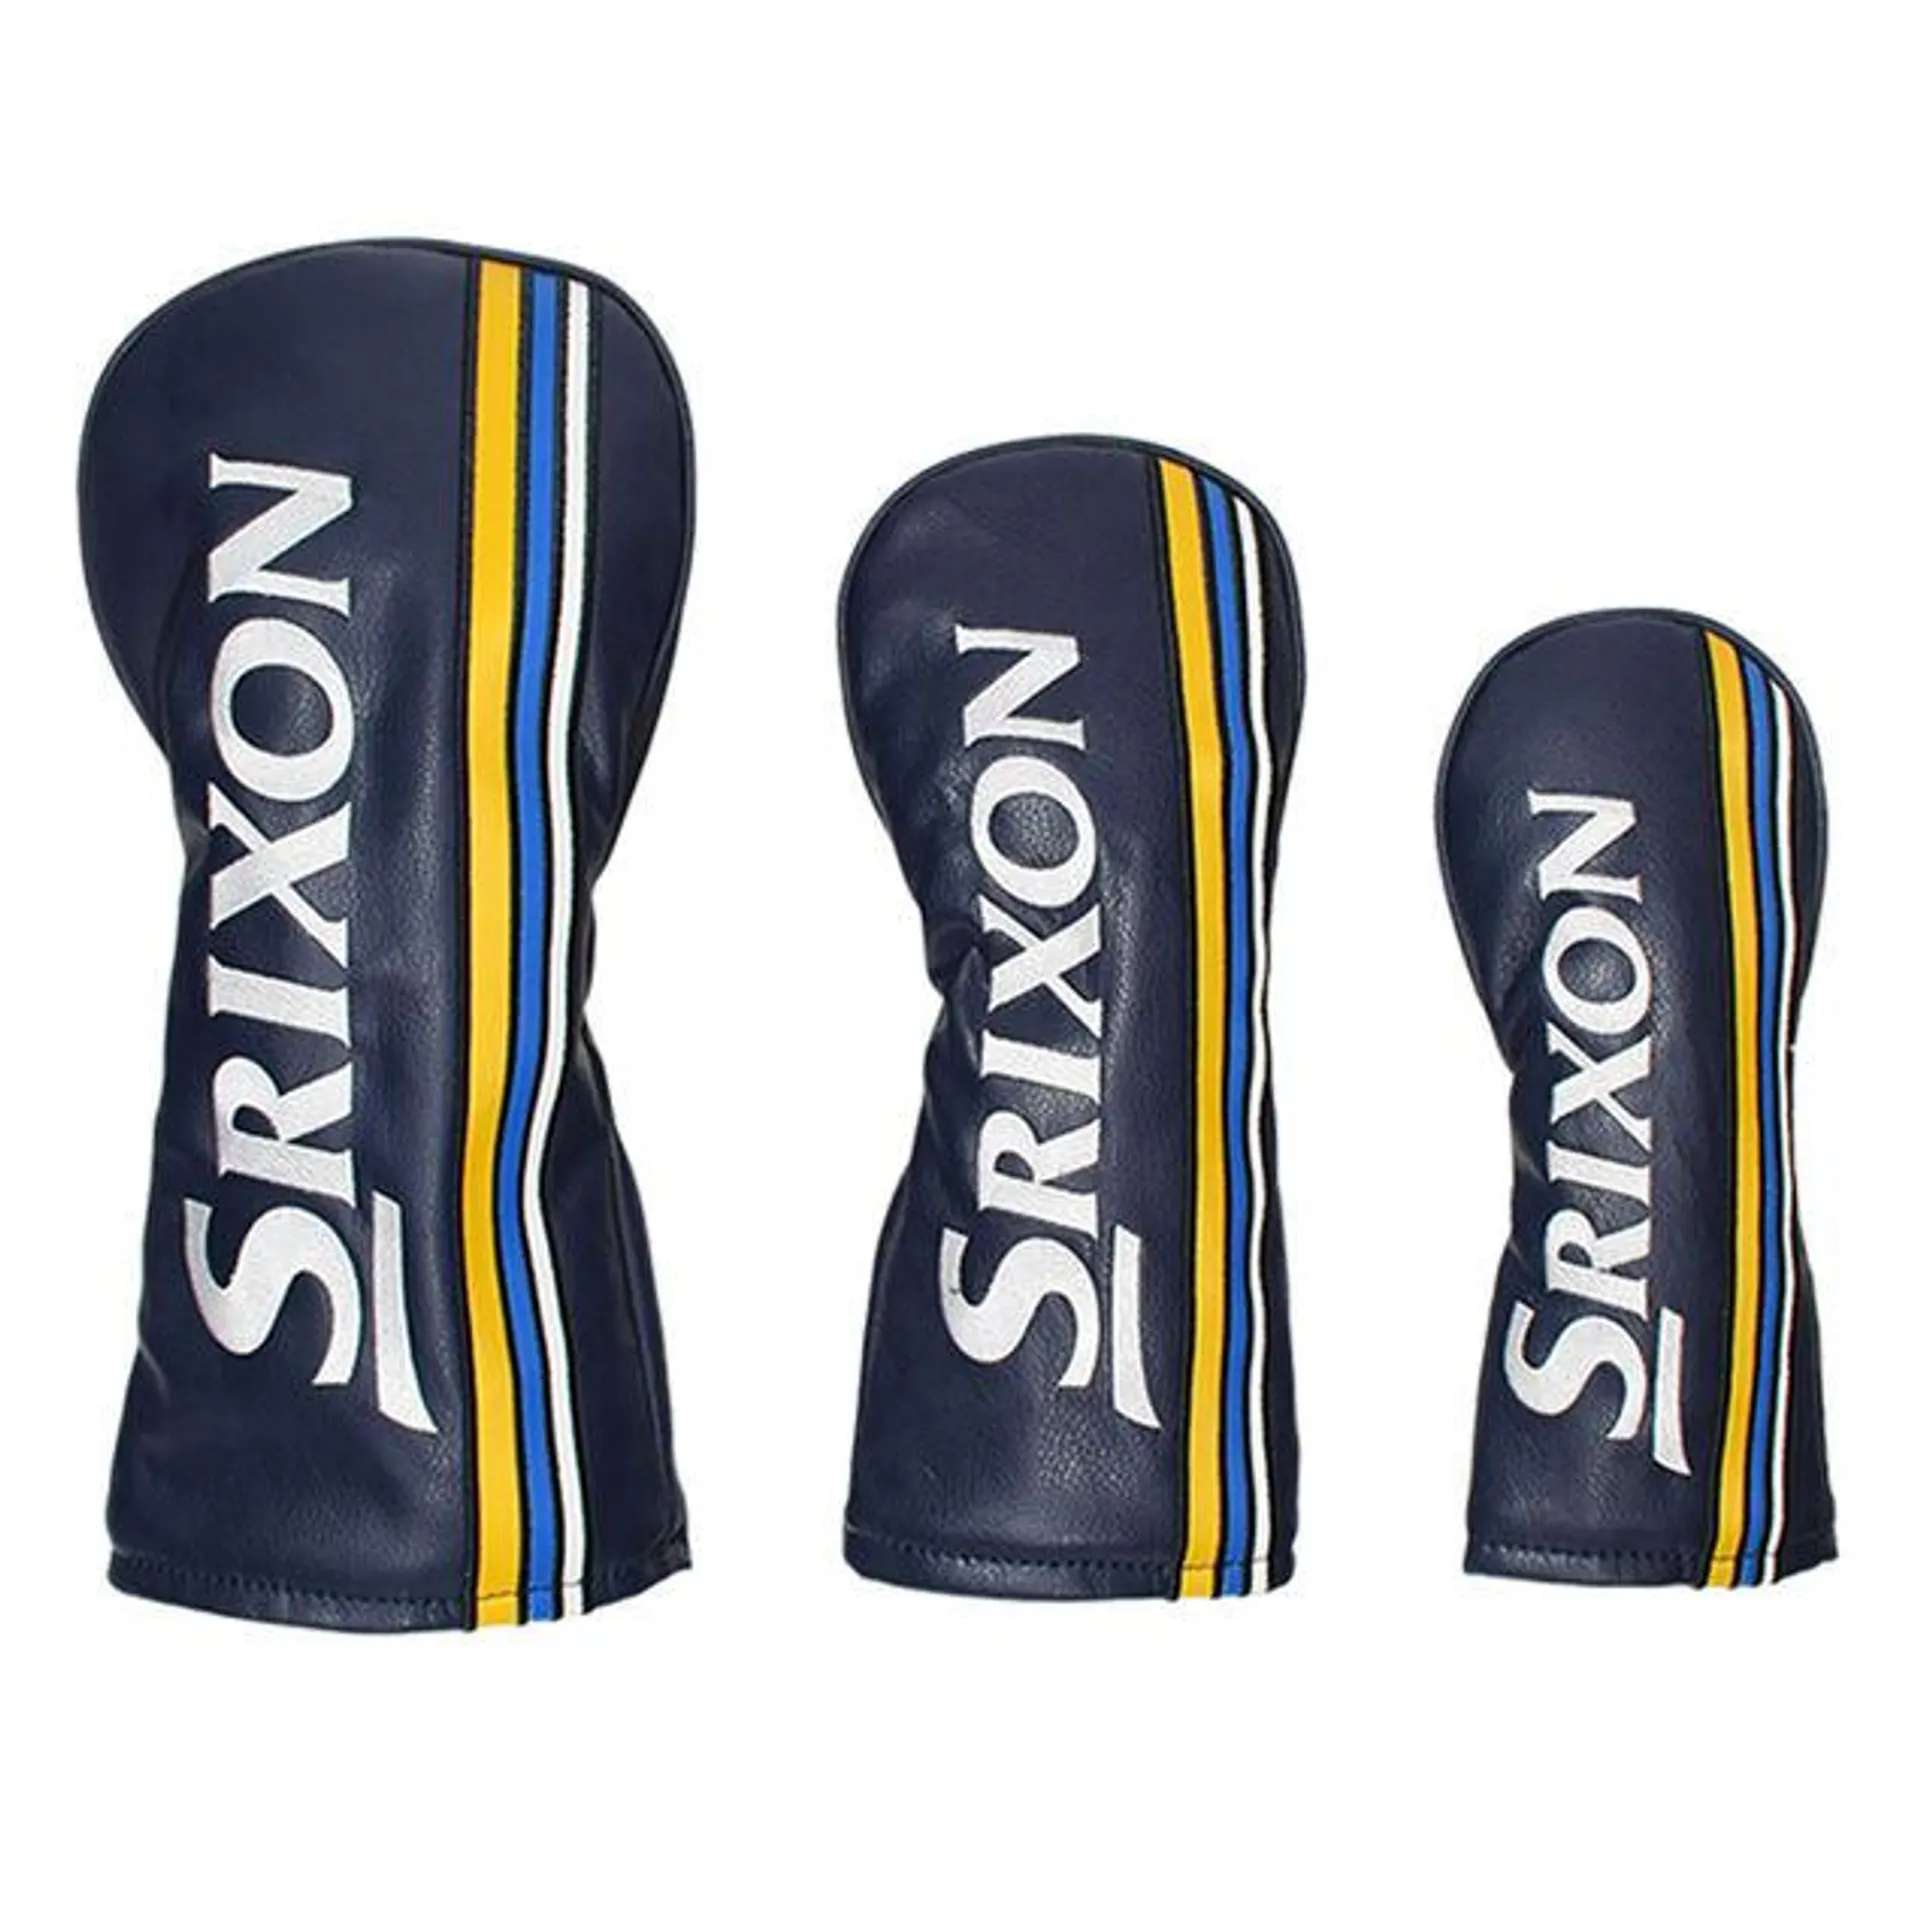 Srixon The Open Limited-Edition Golf Head Covers